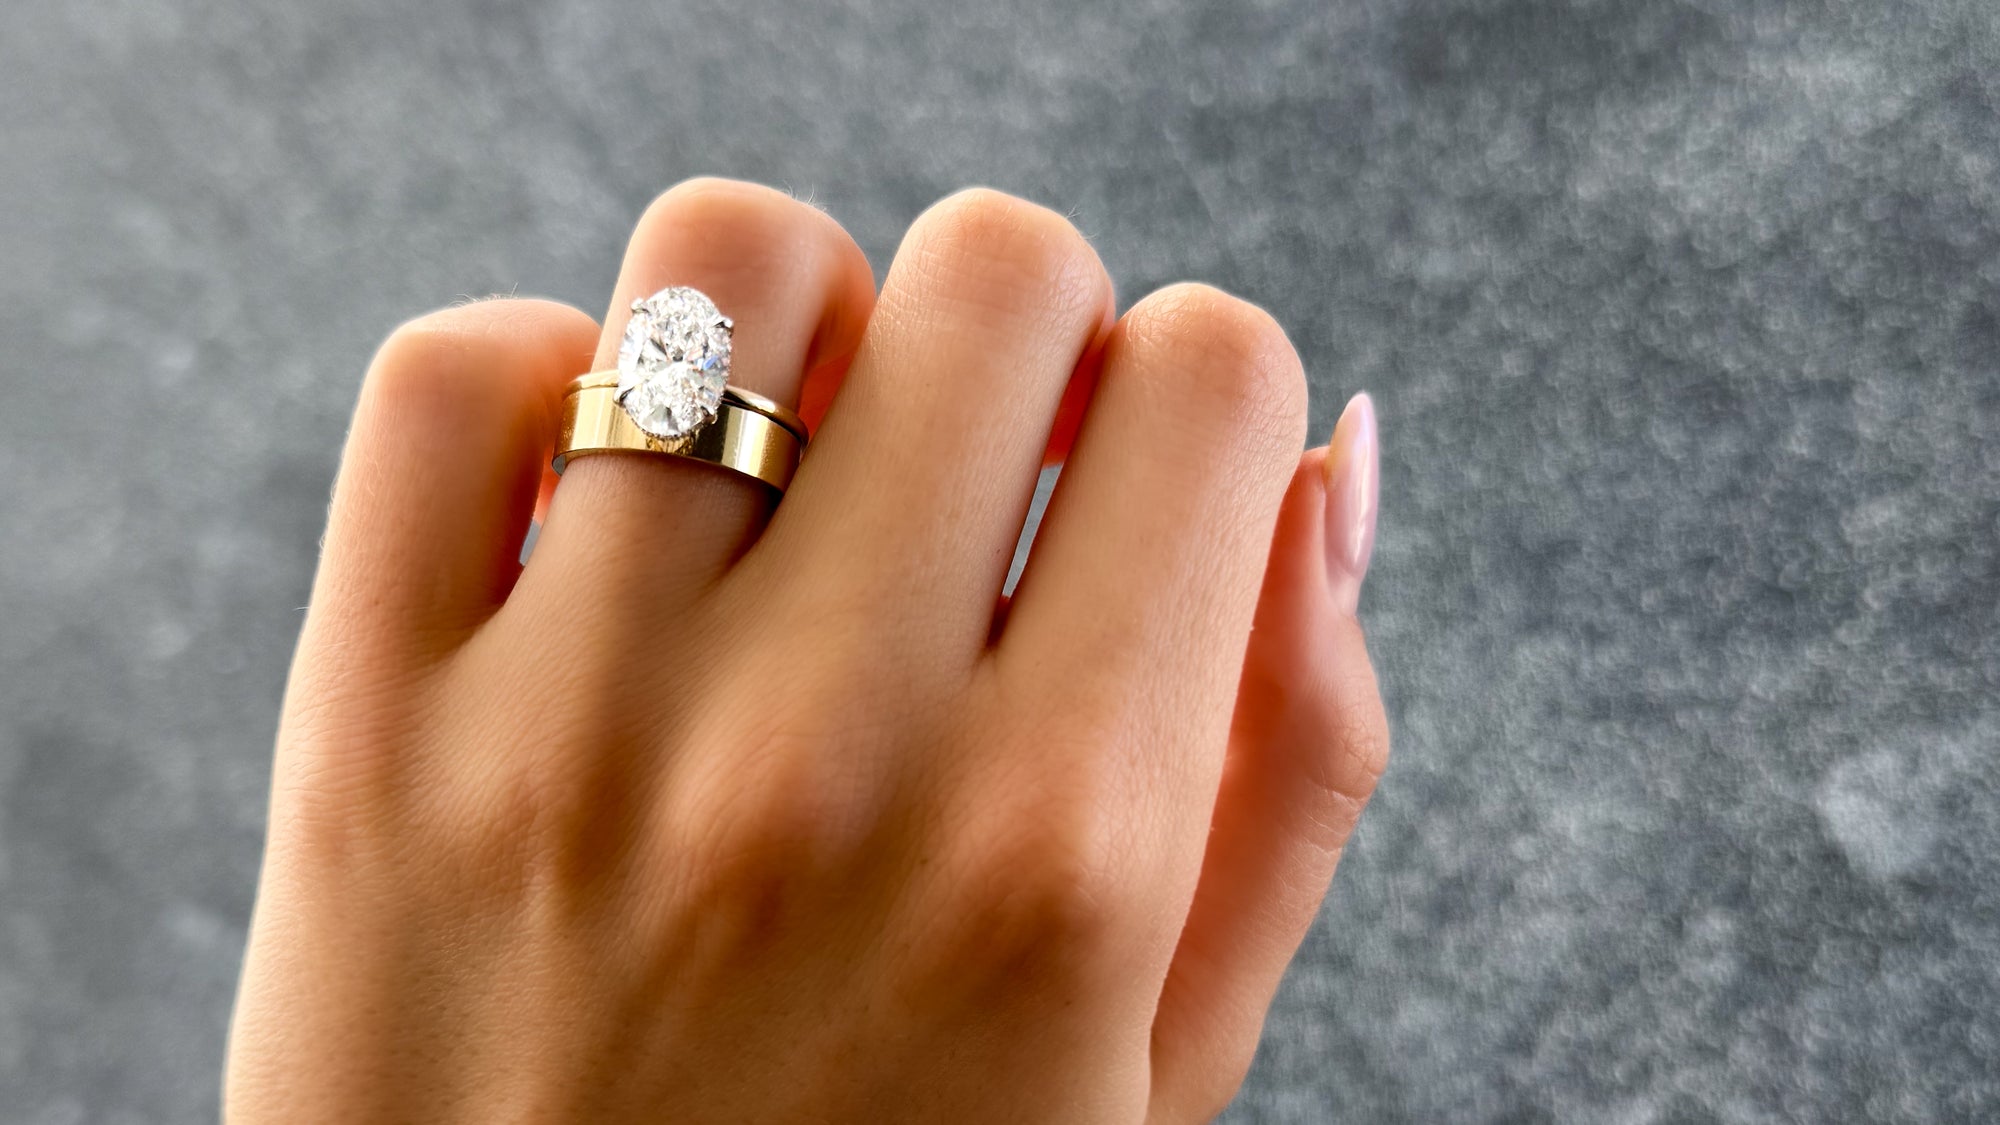 Singing the Praises of Choosing a Simple Engagement Ring